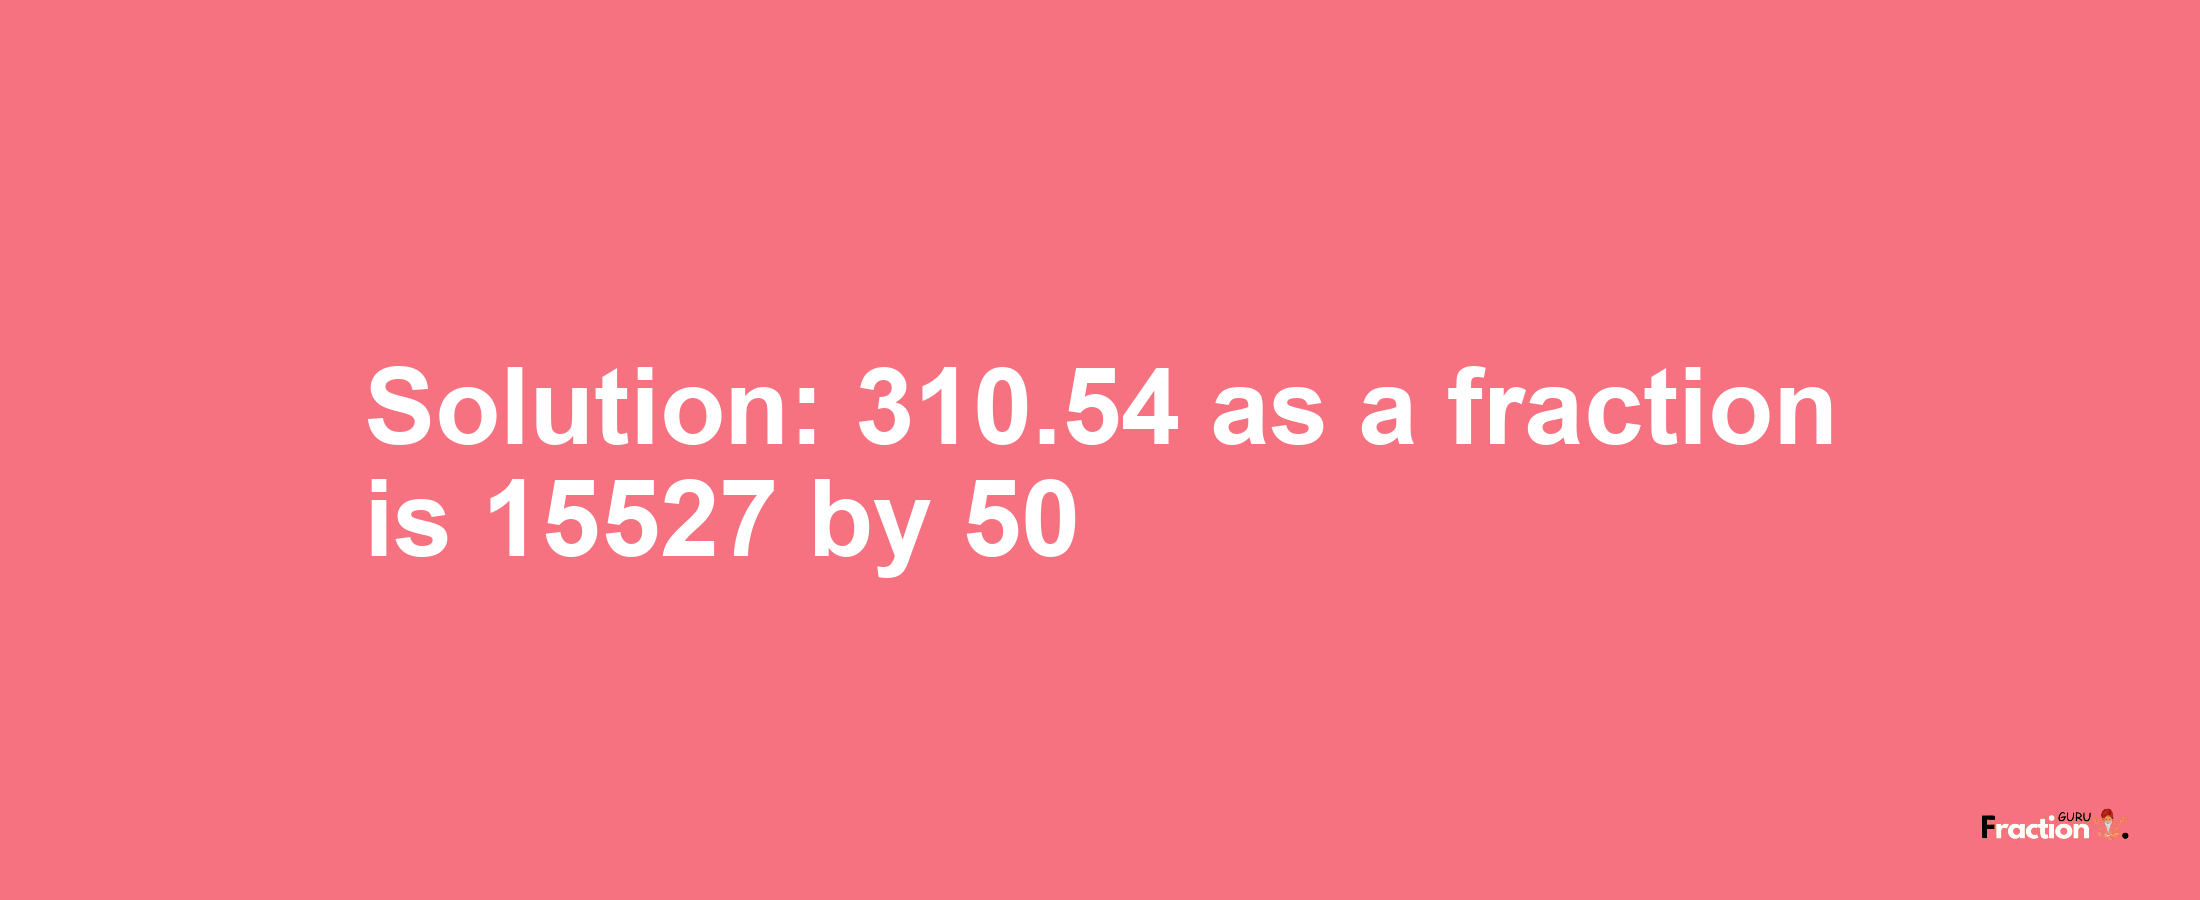 Solution:310.54 as a fraction is 15527/50